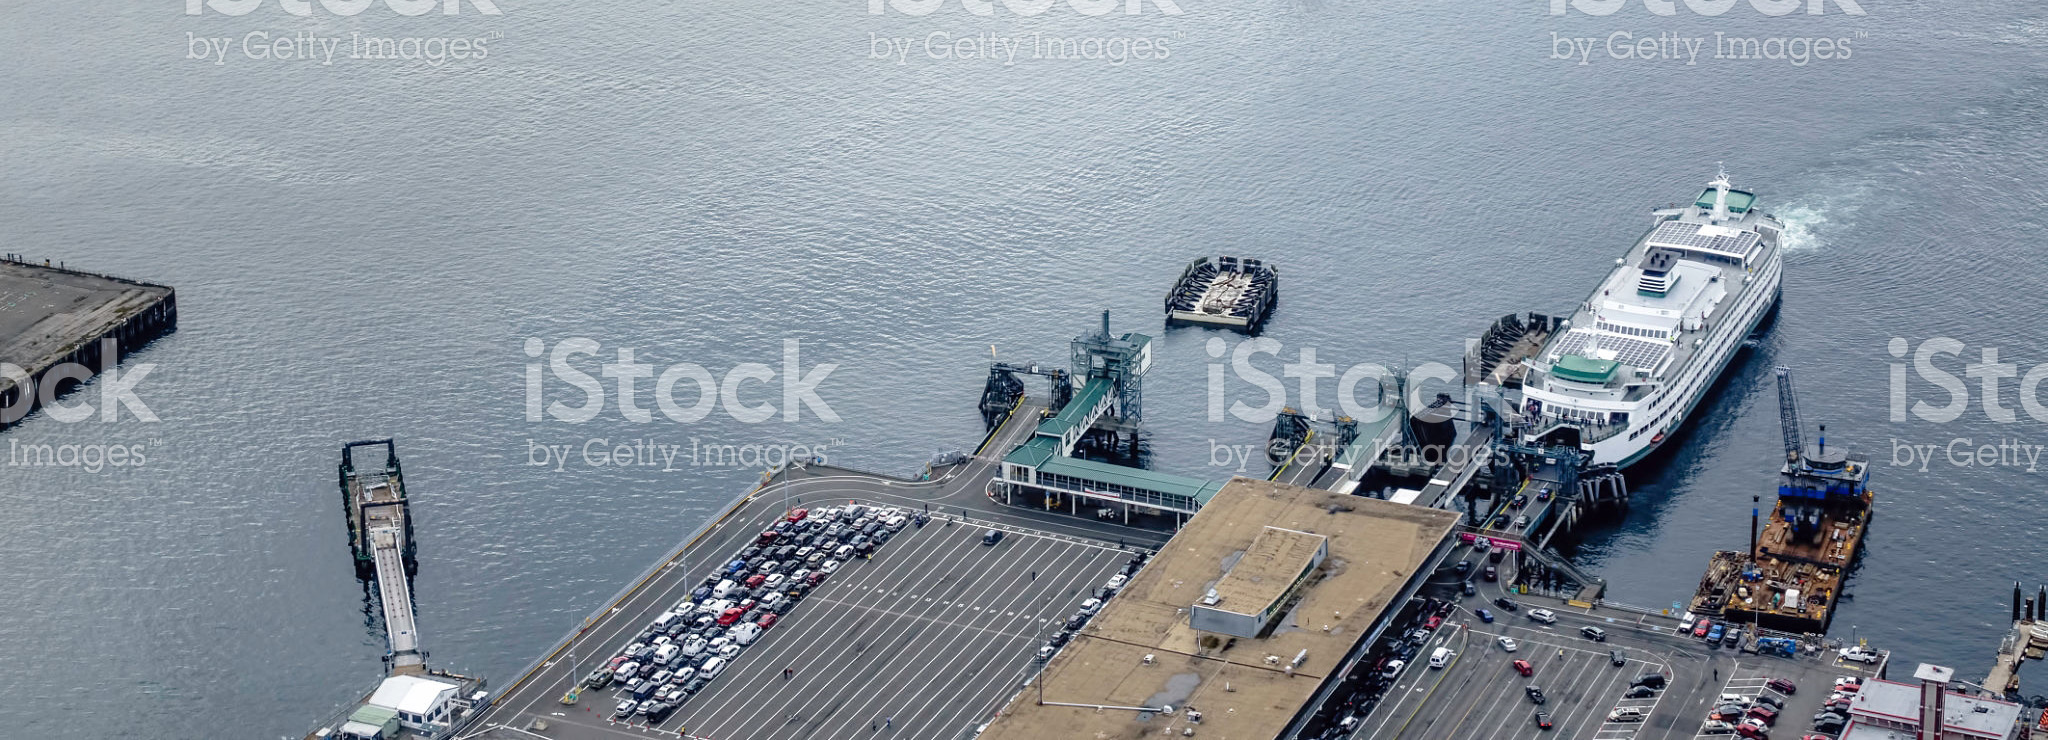 Aerial view of a ferry terminal in Seattle, with one ferry docked and another approaching lines of parked vehicles in wait (pedestrians are too small to be identified)